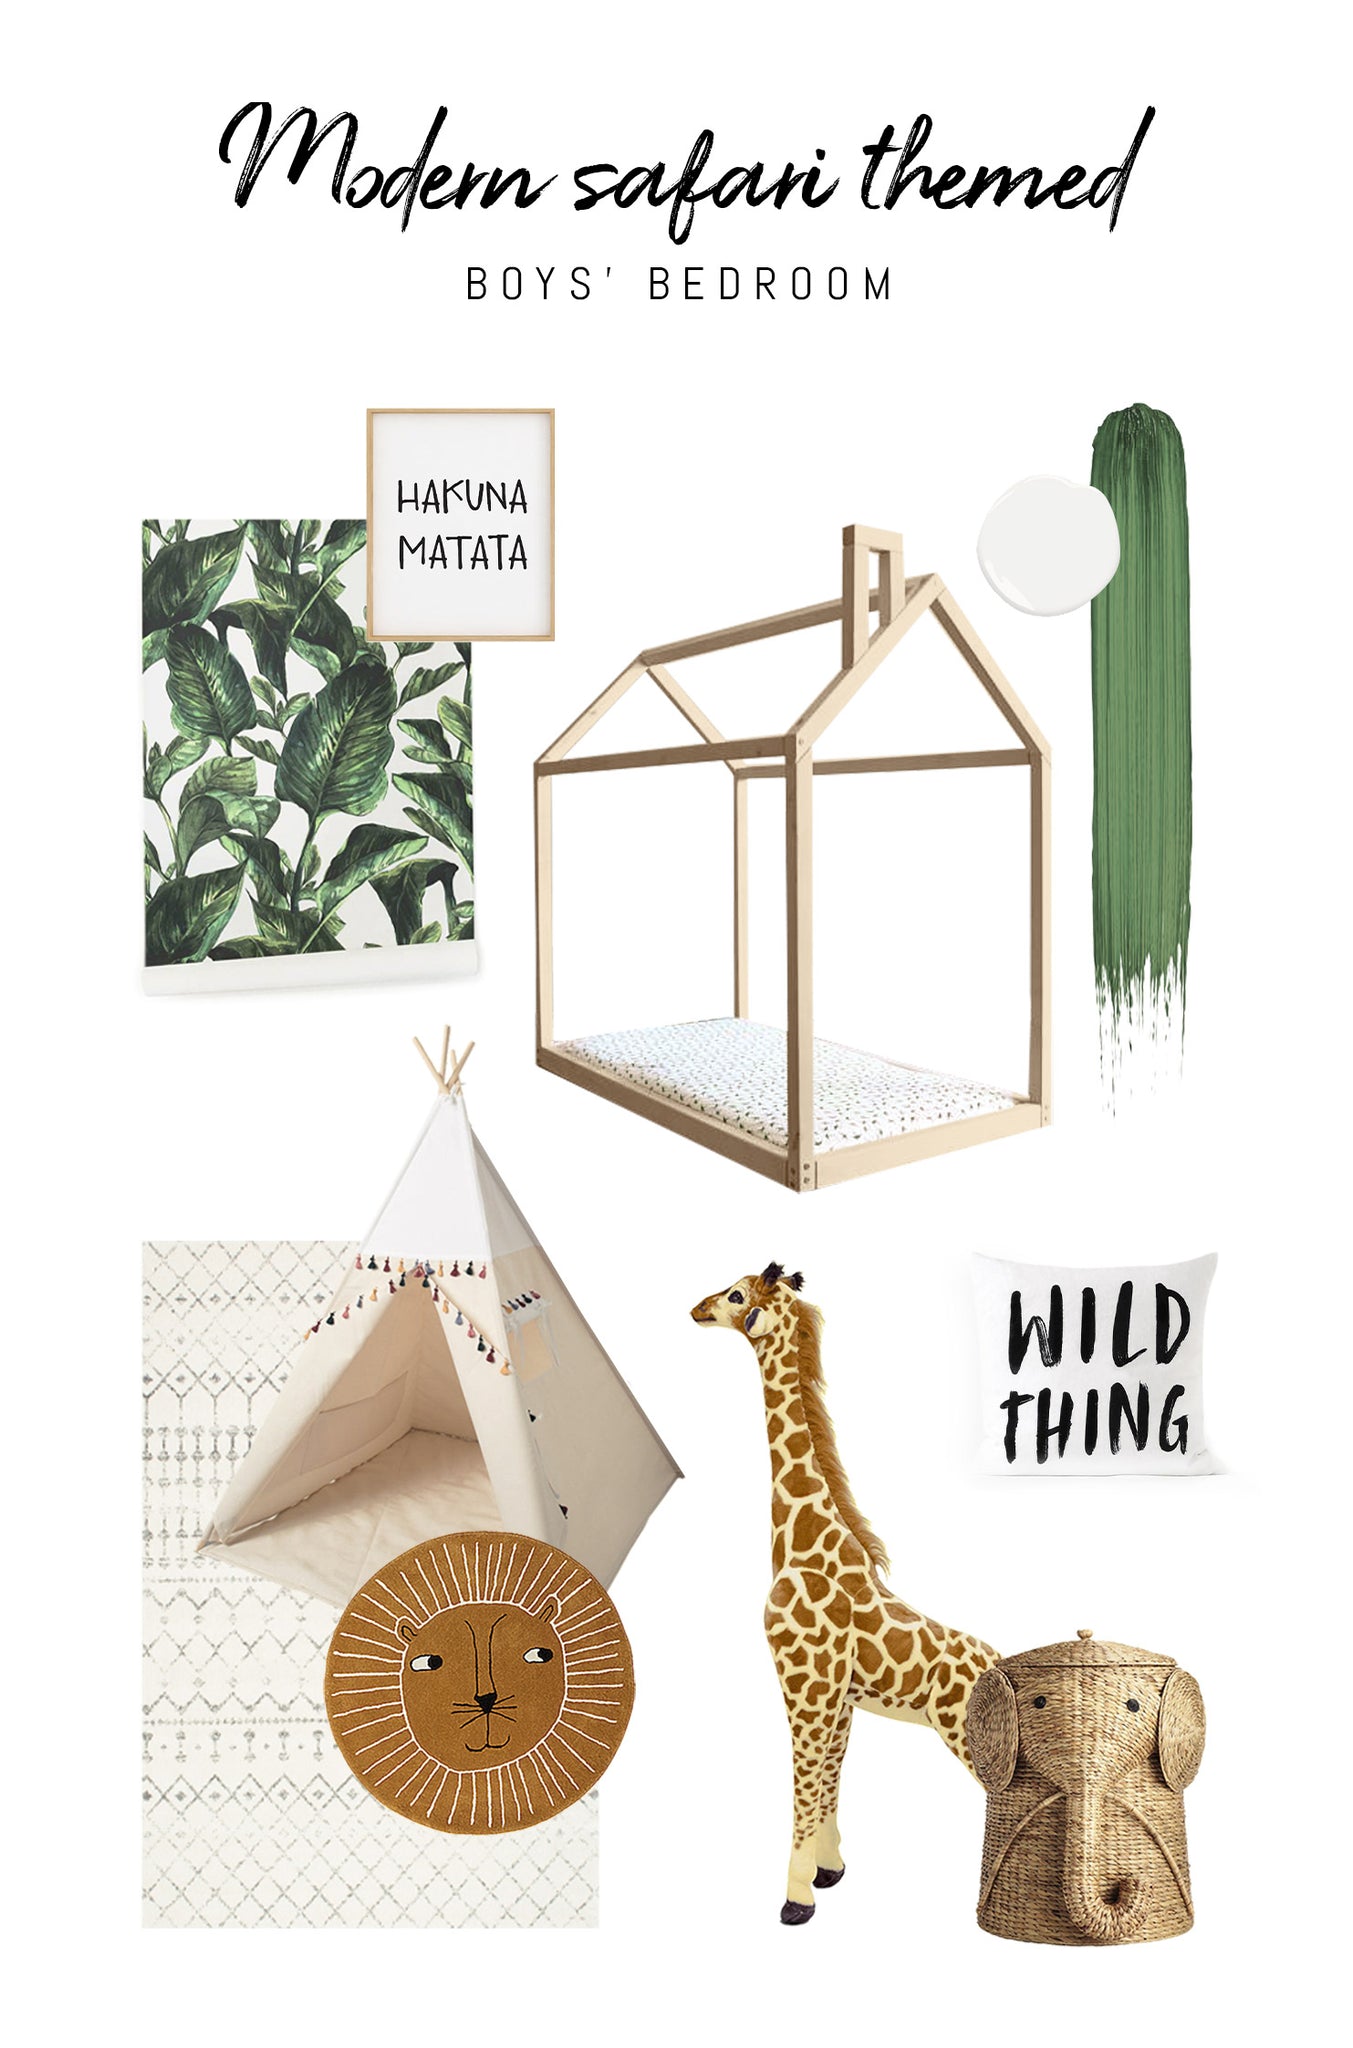 How to decorate safari jungle inspired bedroom for boys